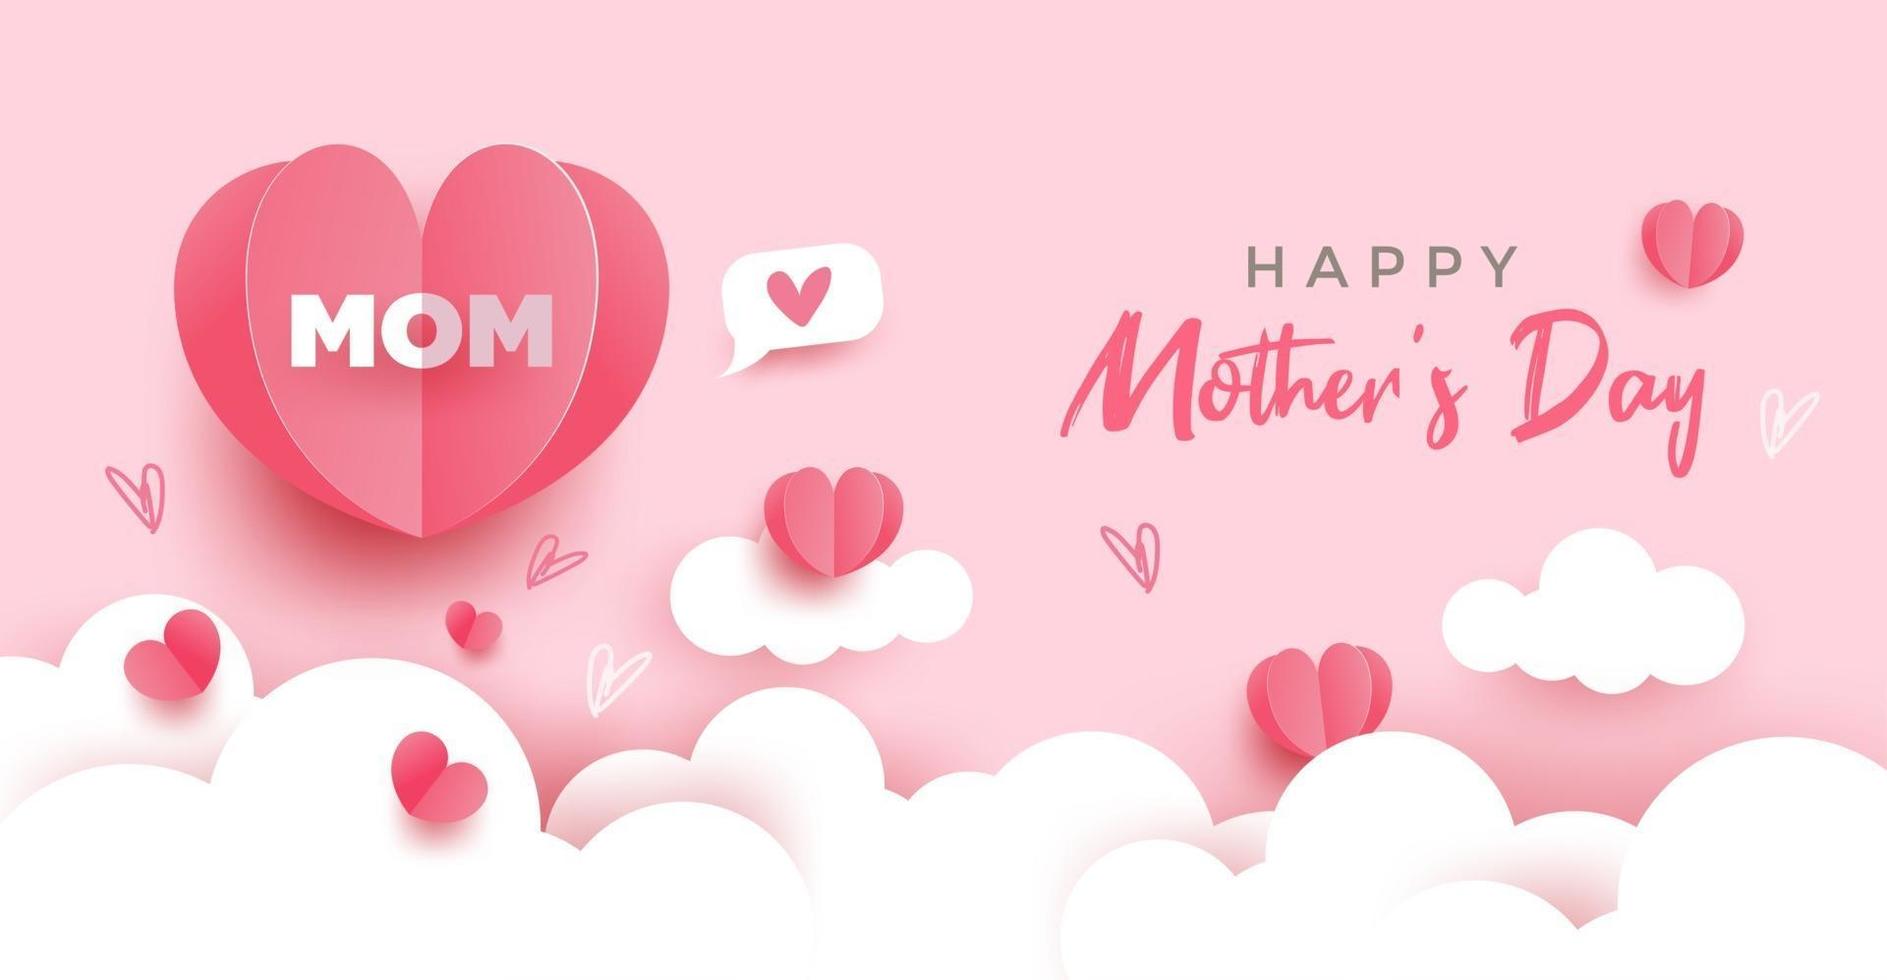 Happy Mother's day card. Paper cut with hearts, clouds and bubble speech on pink pastel background. Vector illustration